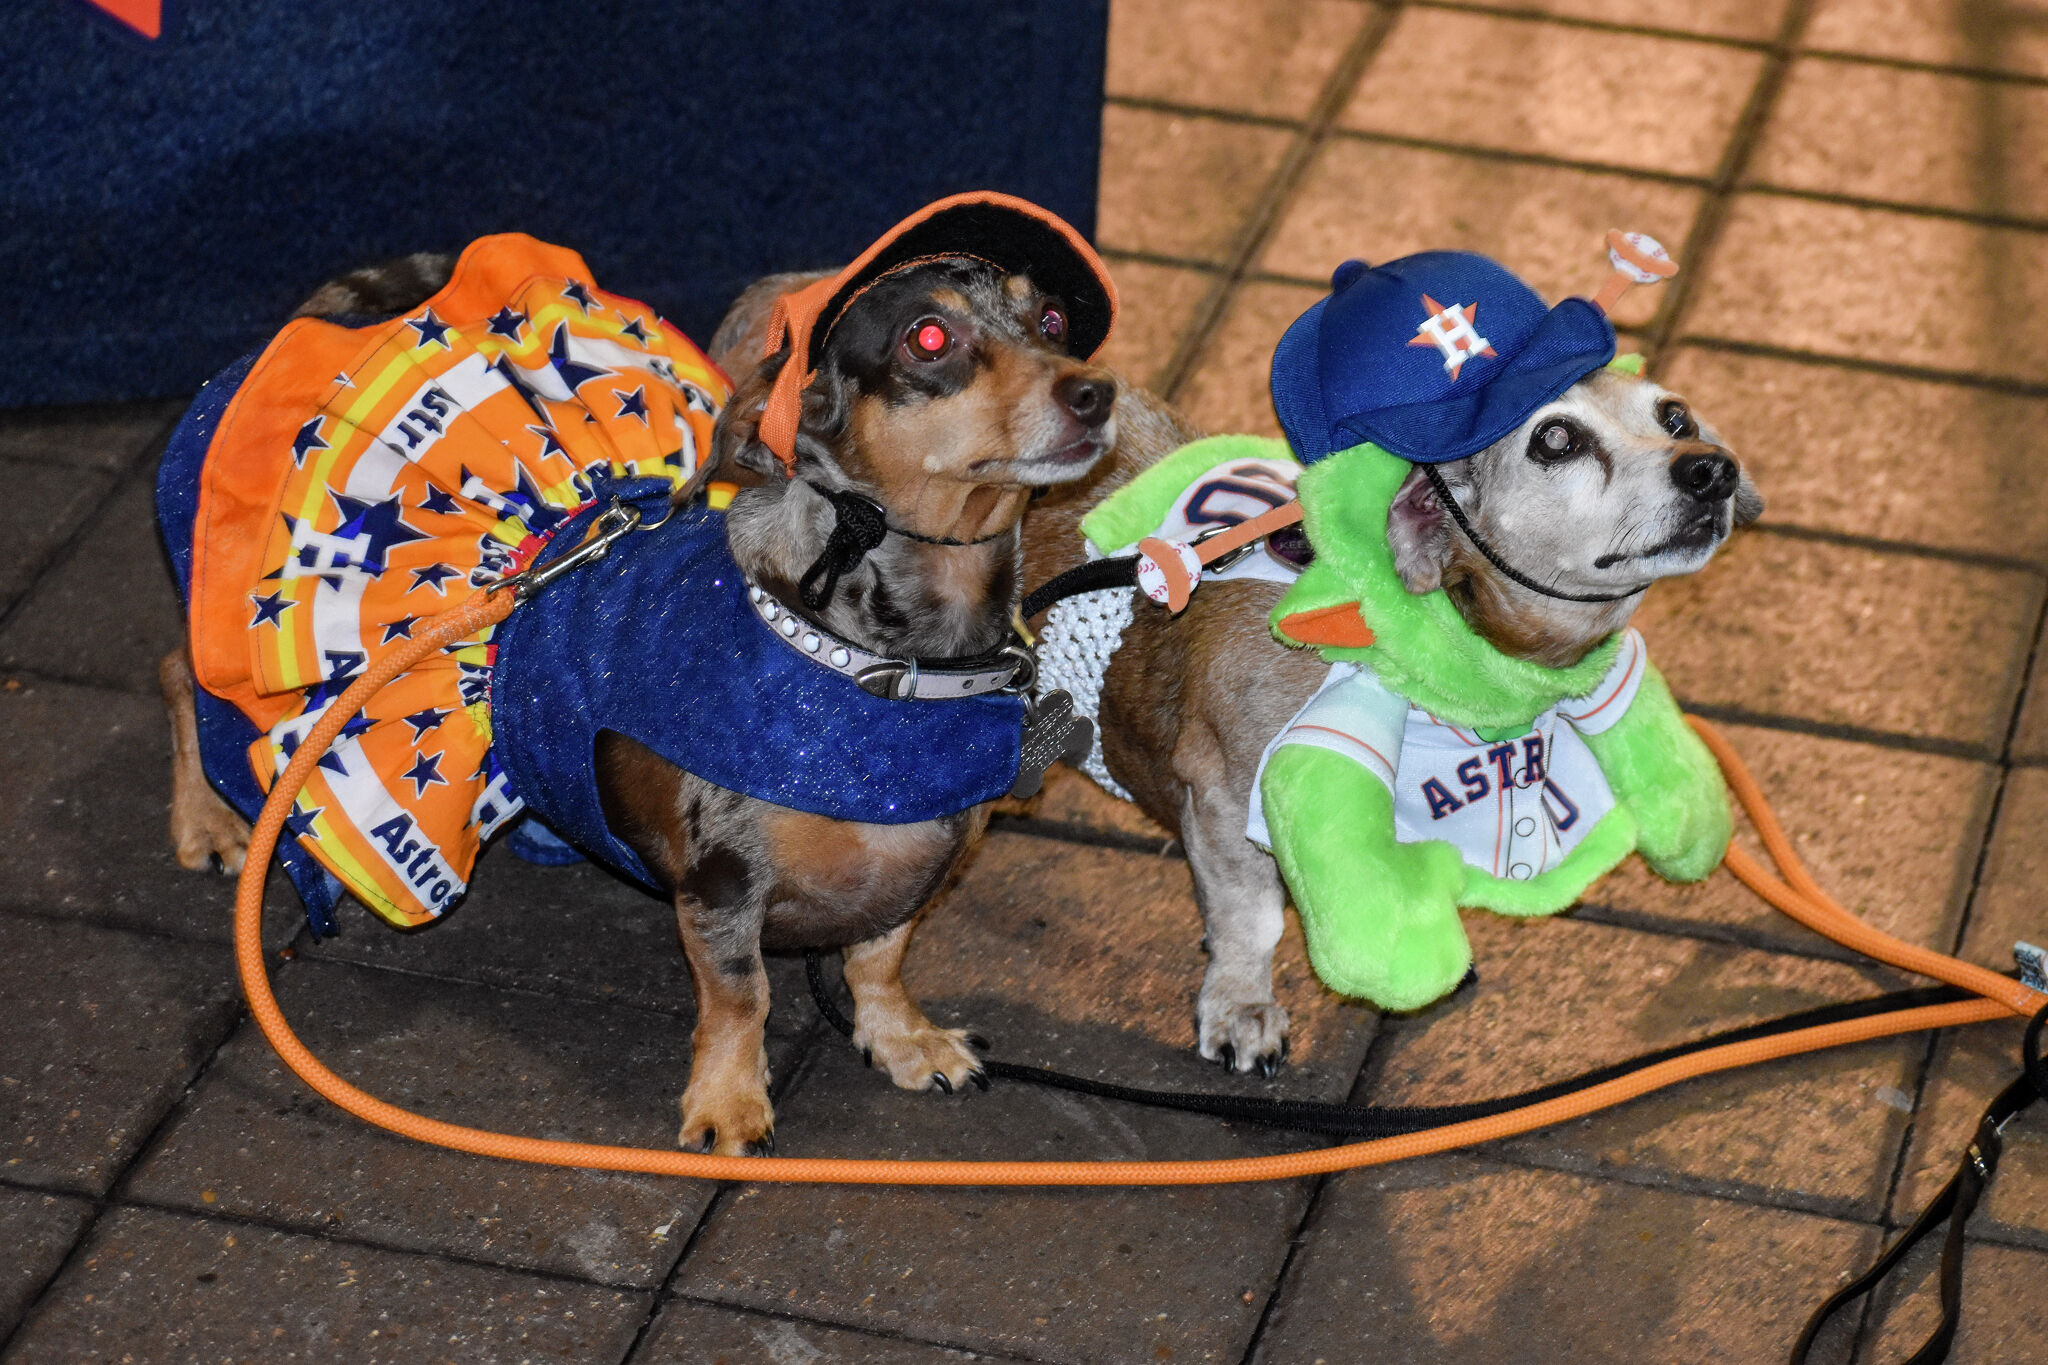 The Astros host Dog Day at Minute Maid Park 